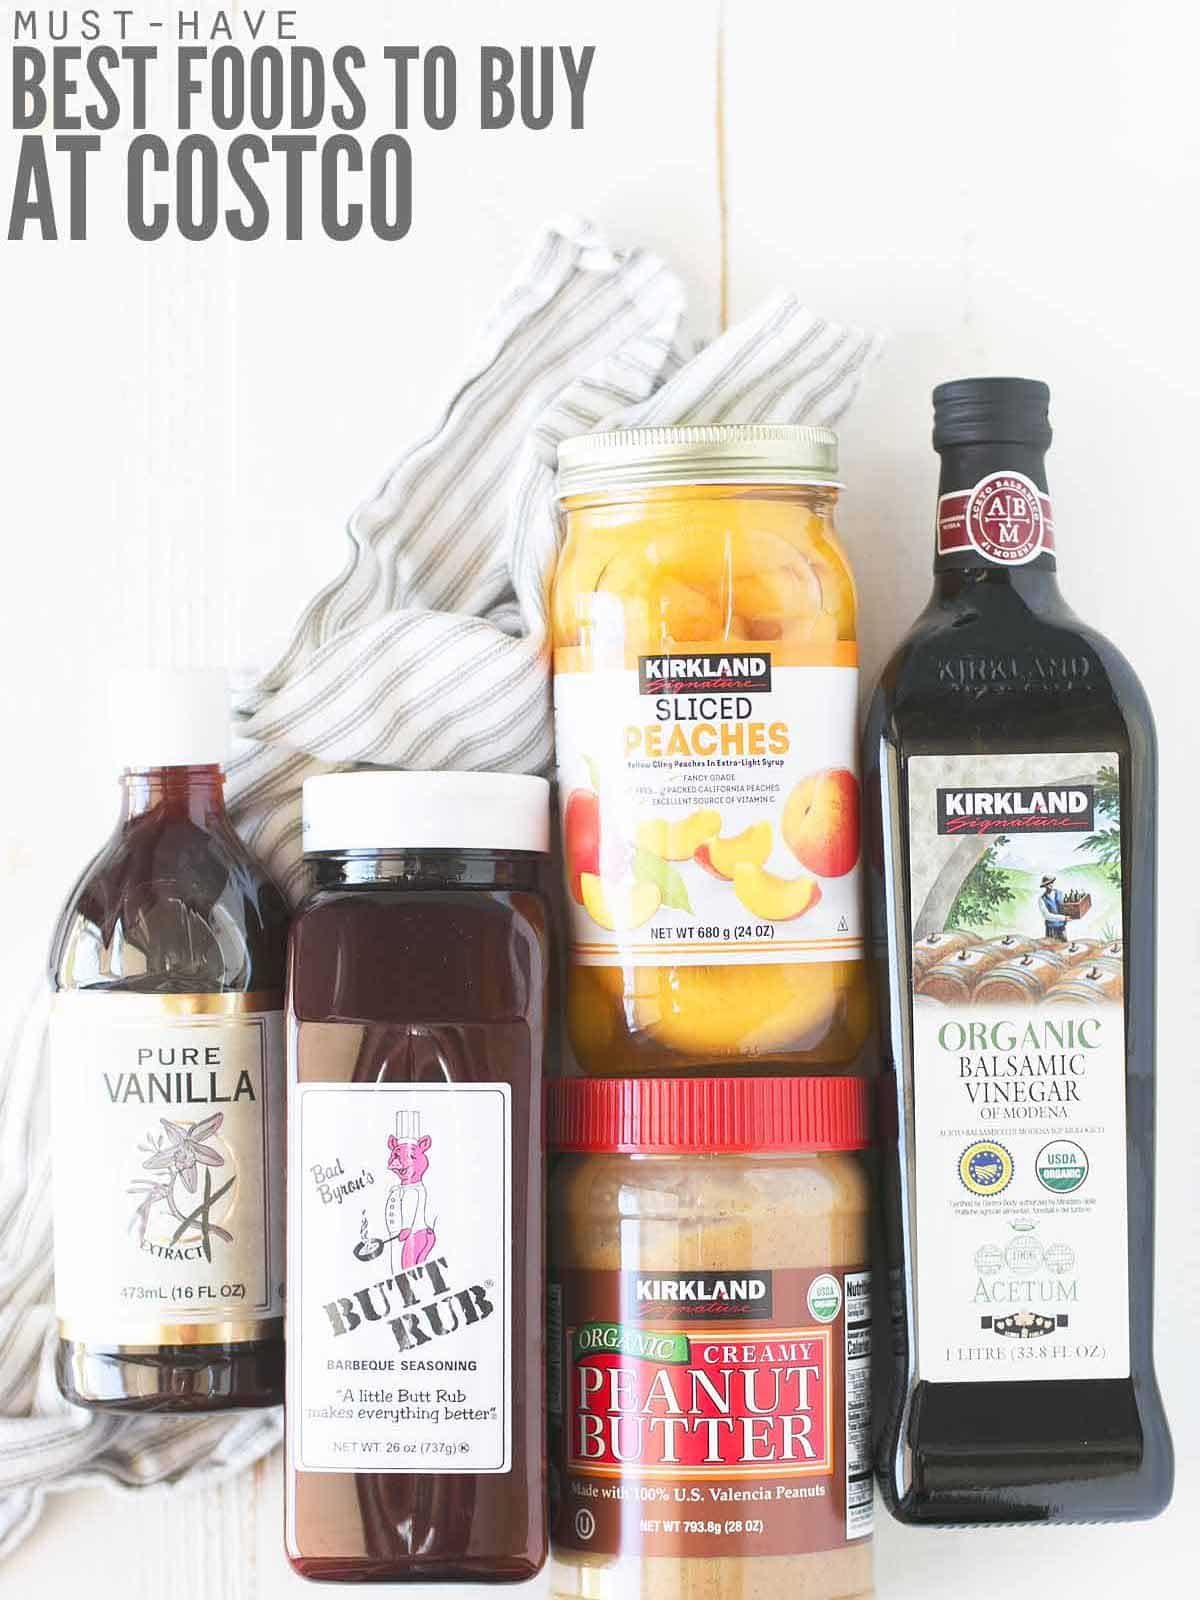 40+ Best Things to Buy at Costco! (Gluten-free and healthy too!)